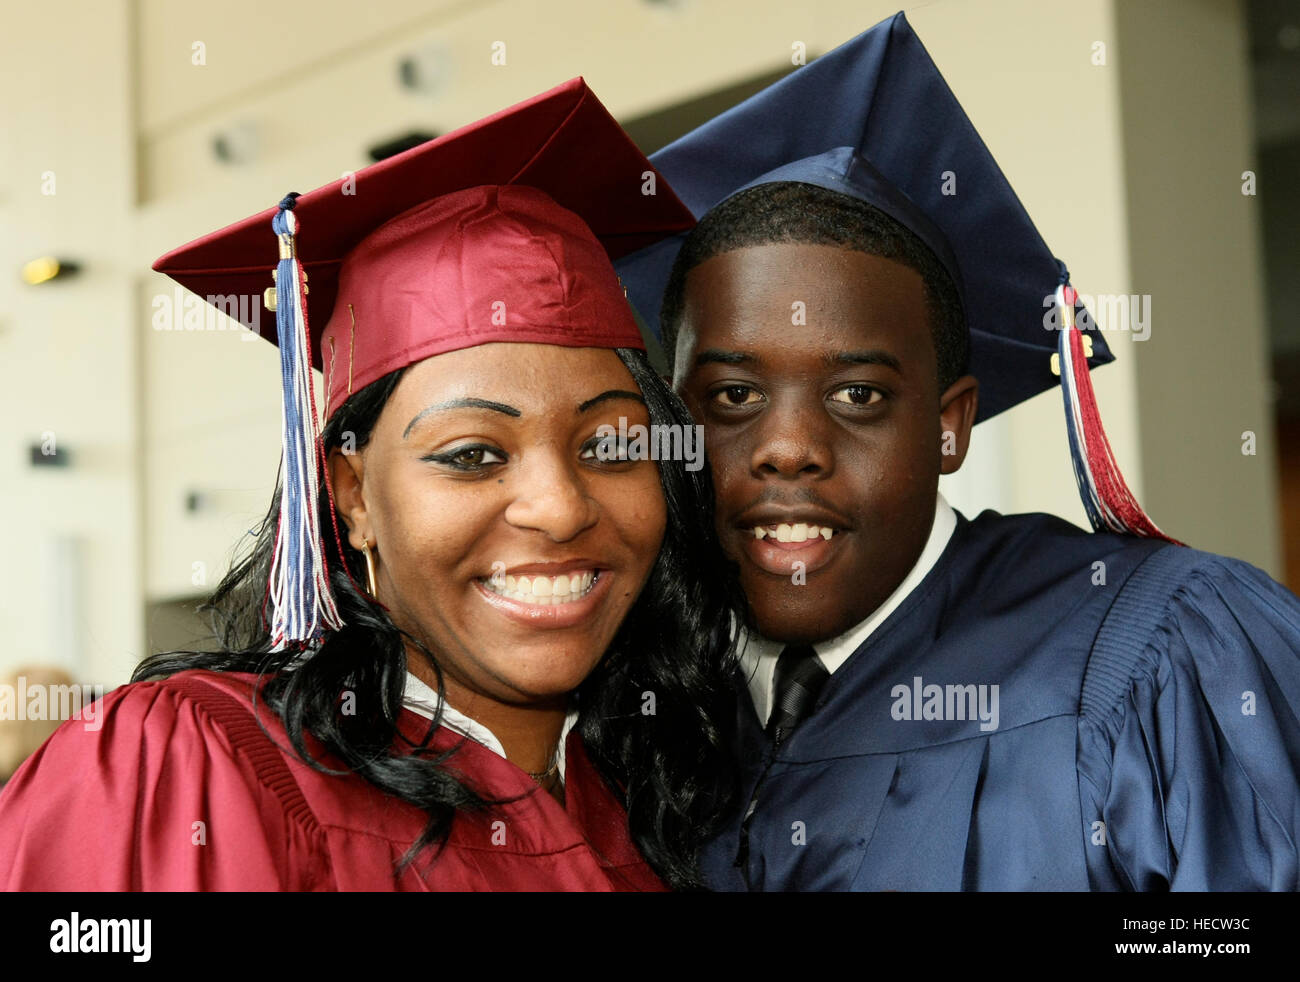 Florida, USA. 20th Dec, 2016. William T. Dwyer High School class of 2010 Graduation at the Palm Beach County Convention Center in West Palm Beach. (Allen Eyestone/The Palm Beach Post) SCR 2745 © Allen Eyestone/The Palm Beach Post/ZUMA Wire/Alamy Live News Stock Photo